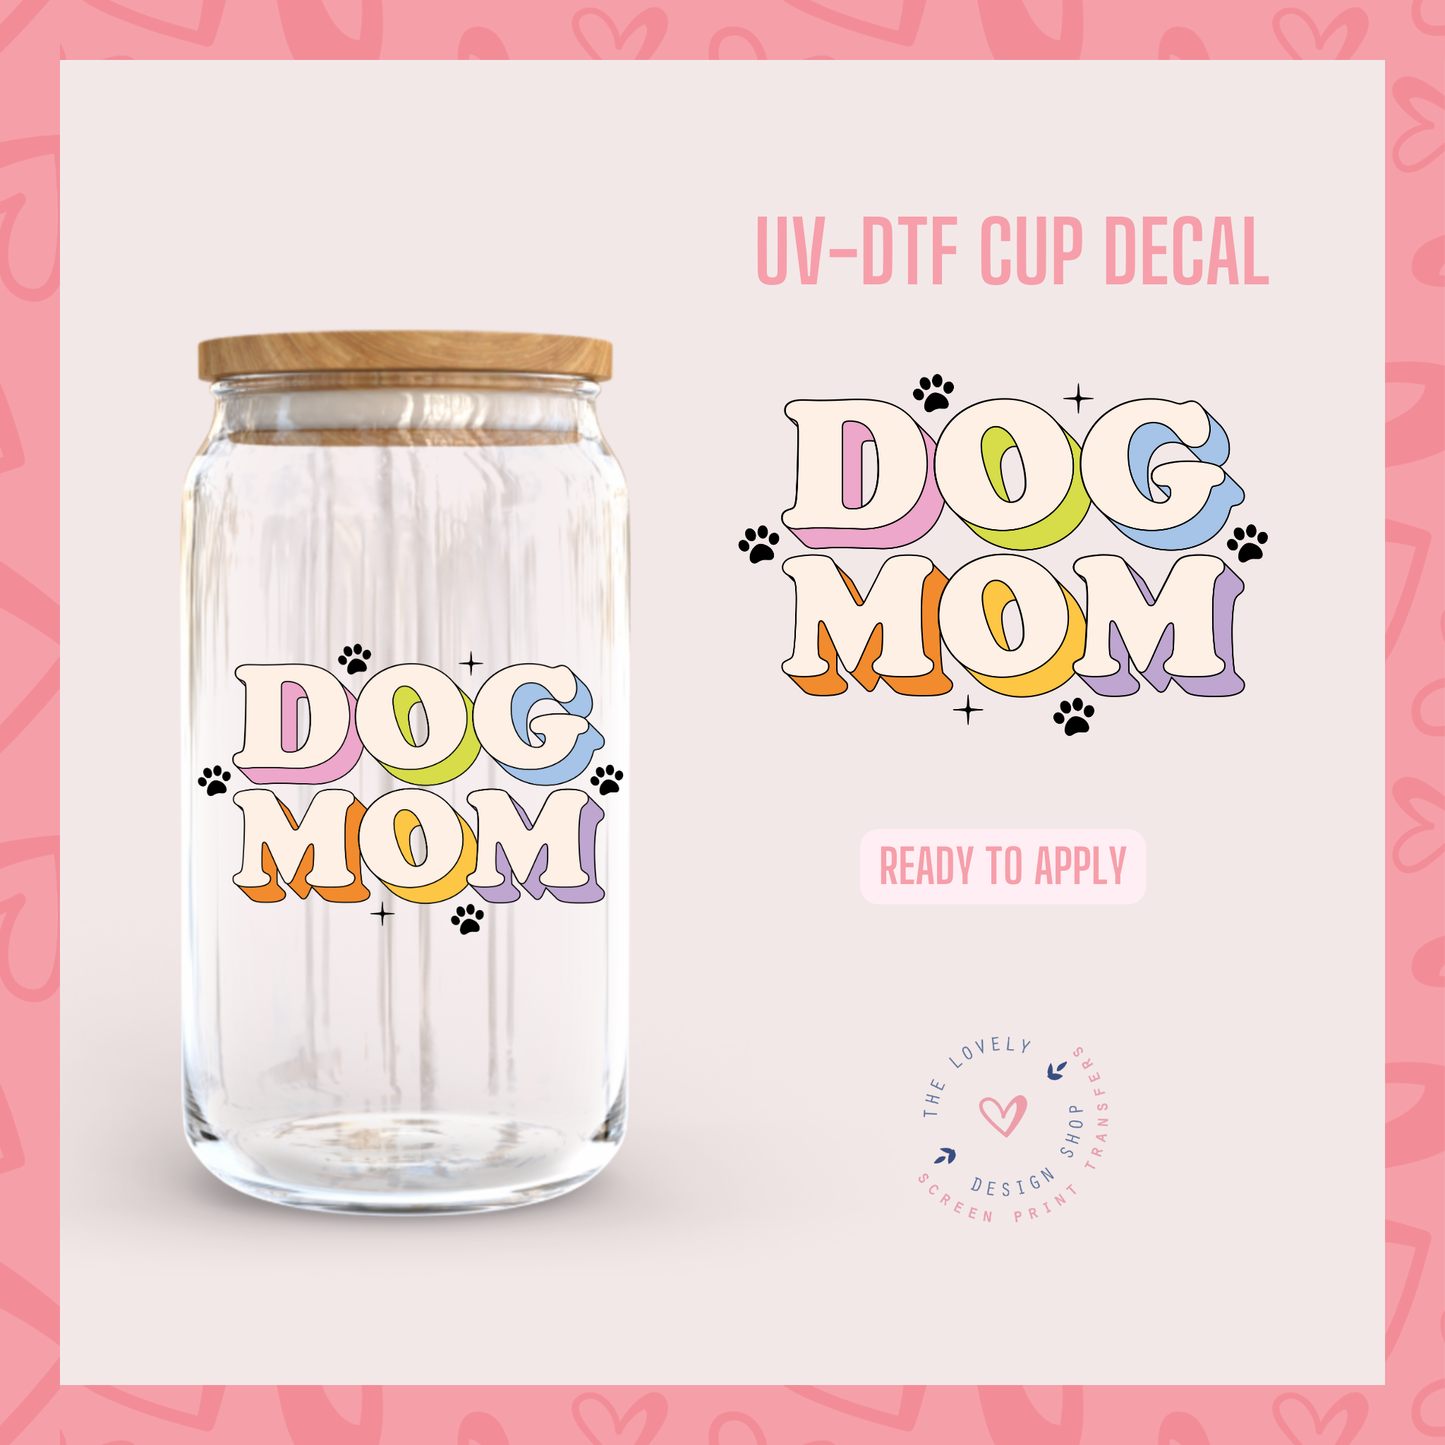 Cute Dog Mom - UV DTF Cup Decal (Ready to Ship) Jun 10